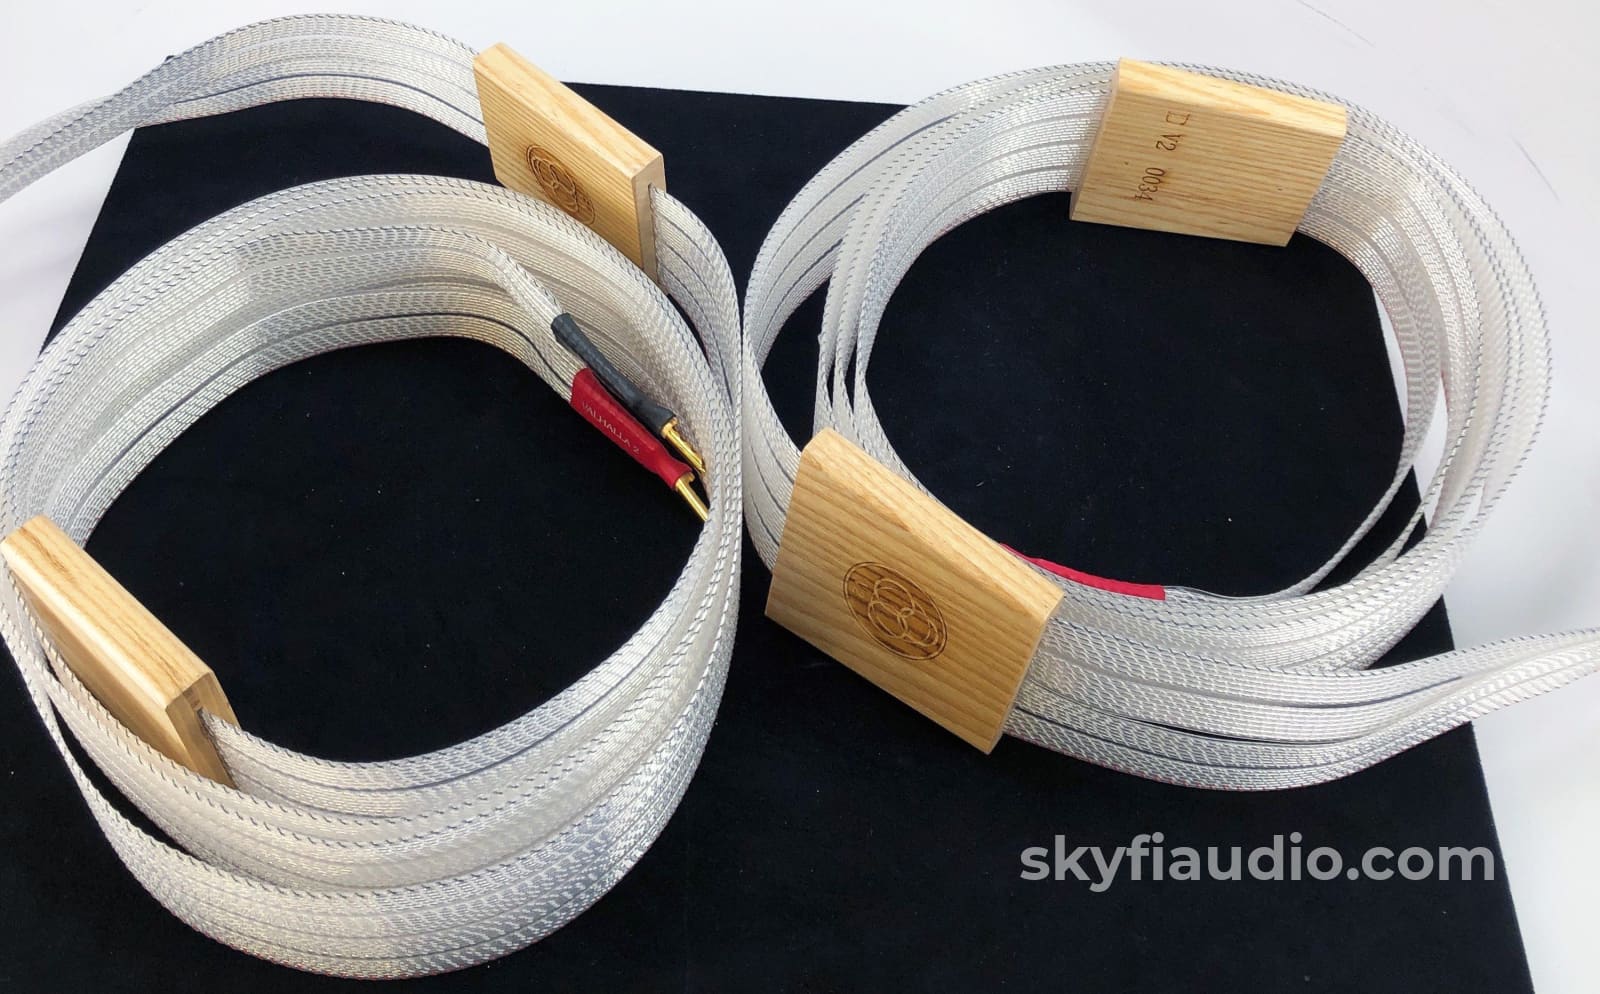 Nordost Valhalla V2 Speaker Cable - The Best Ever Made Like New 3M Cables